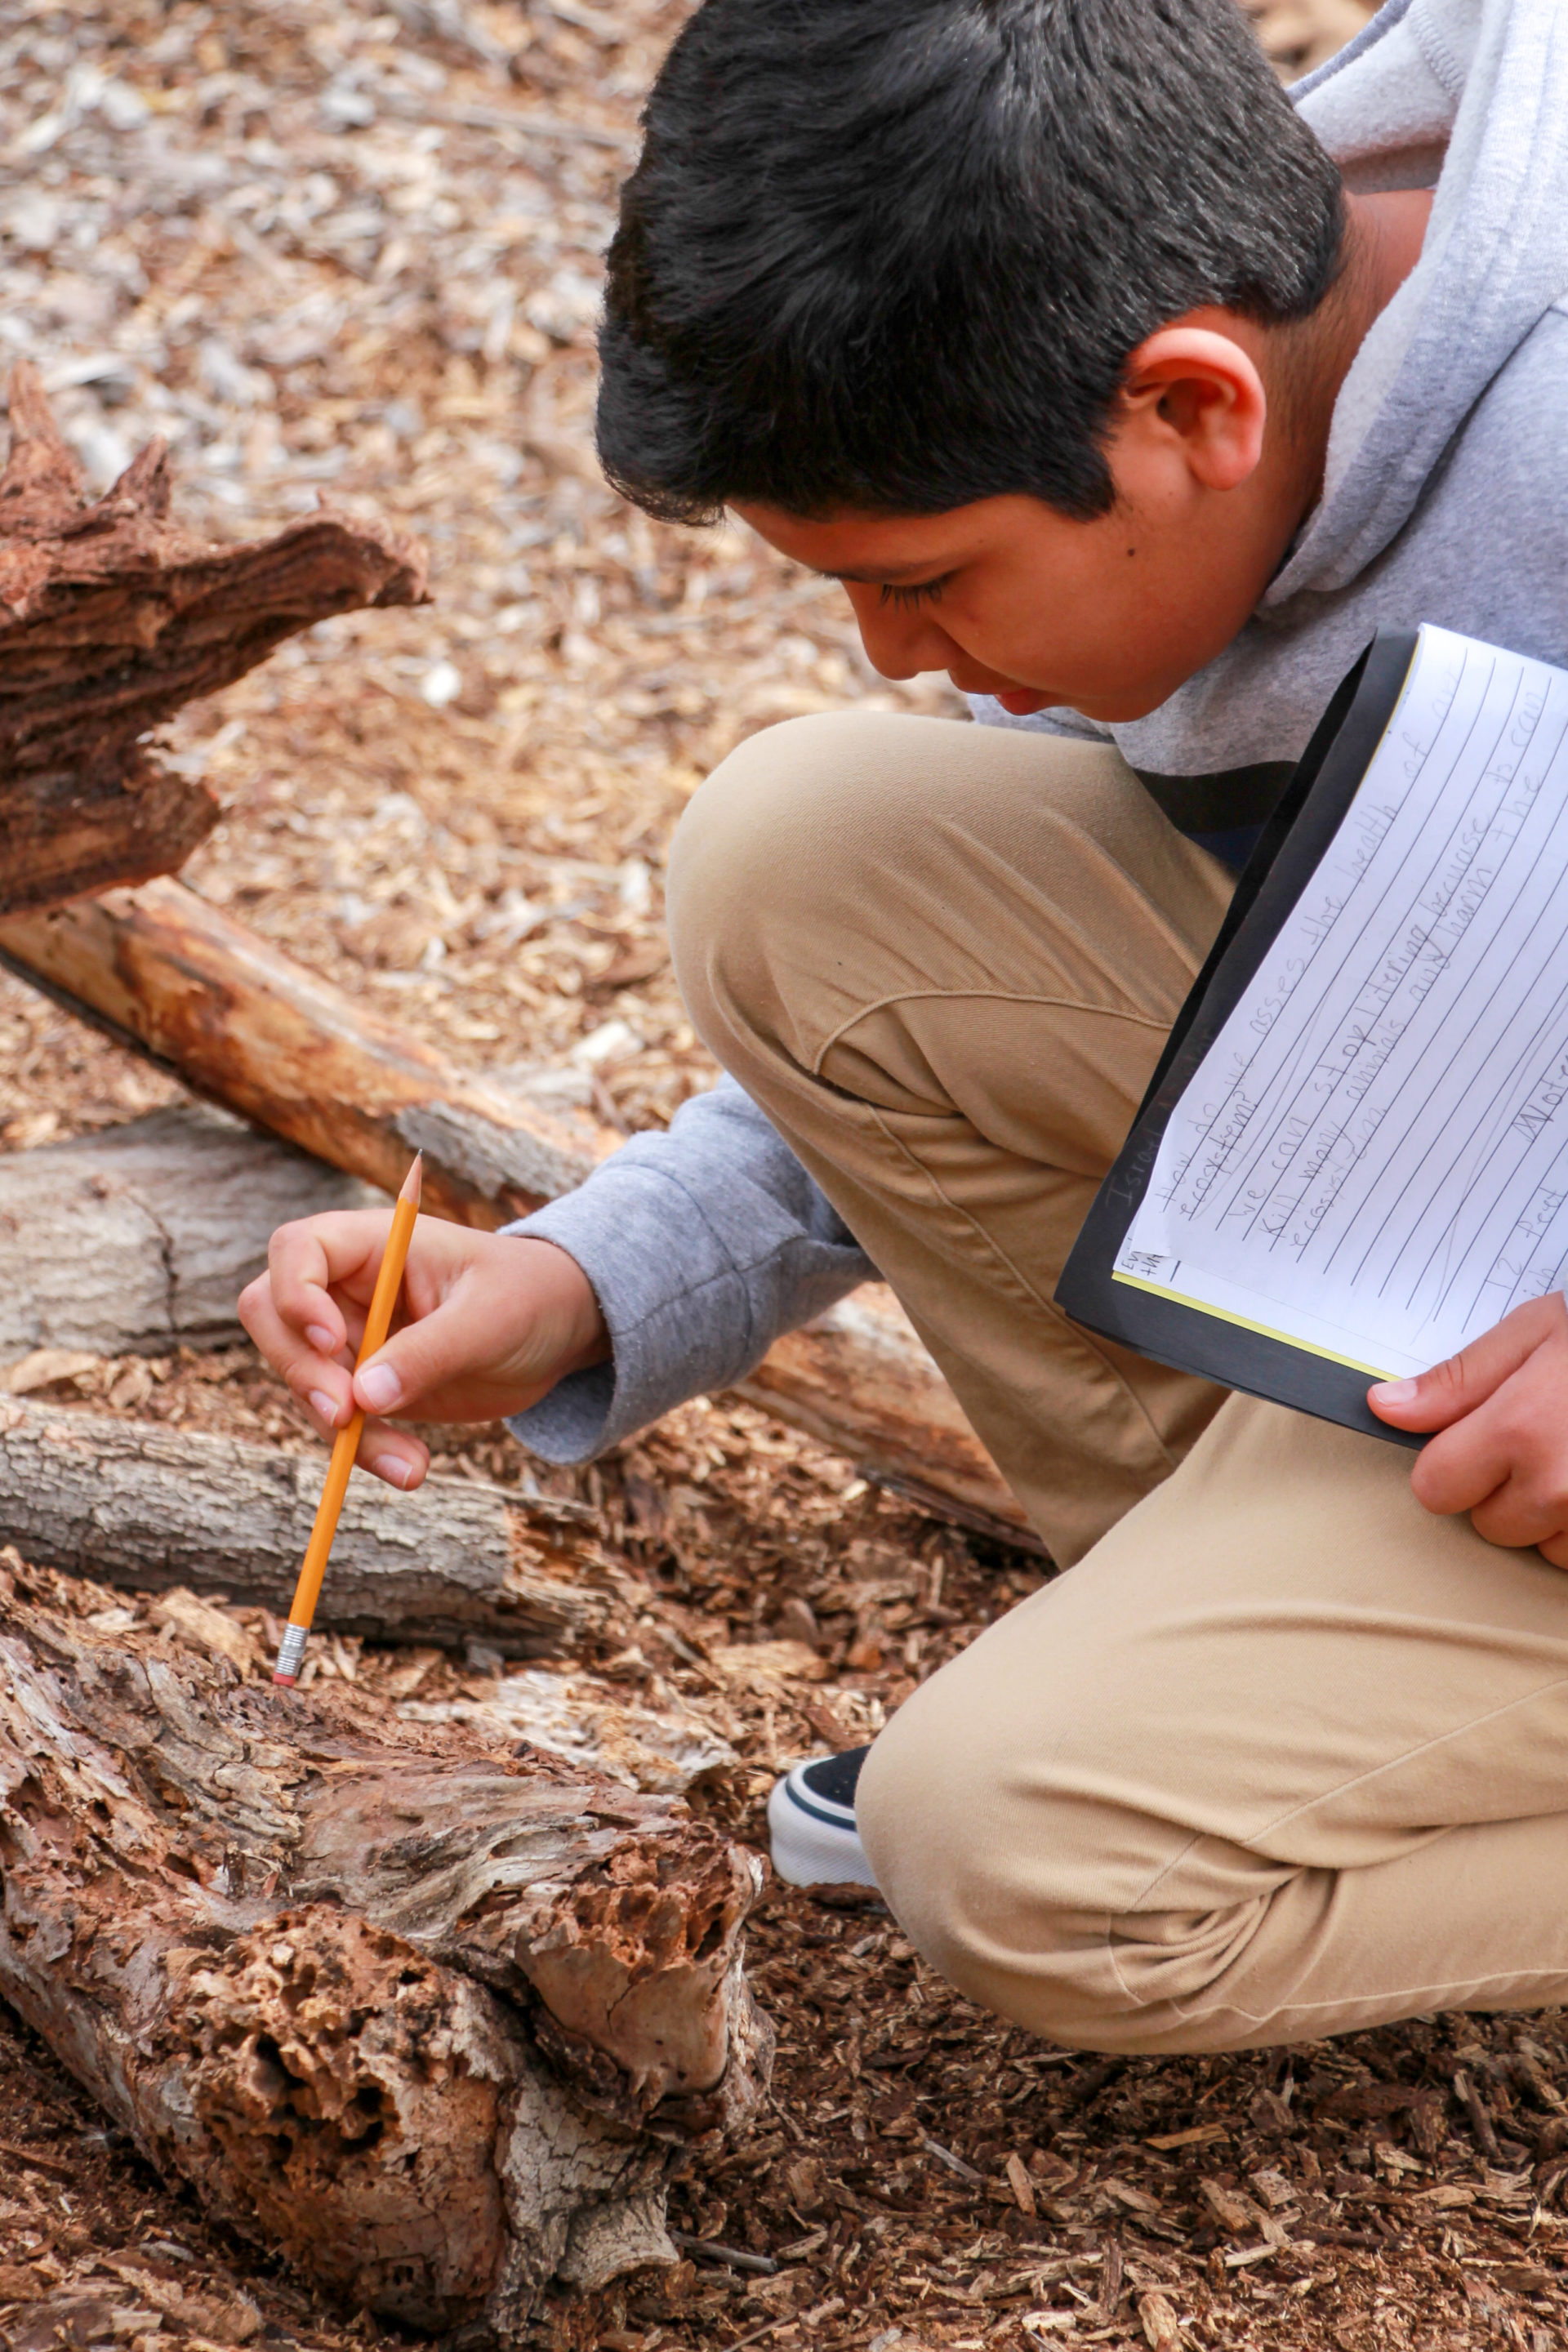 Child observing a decaying log